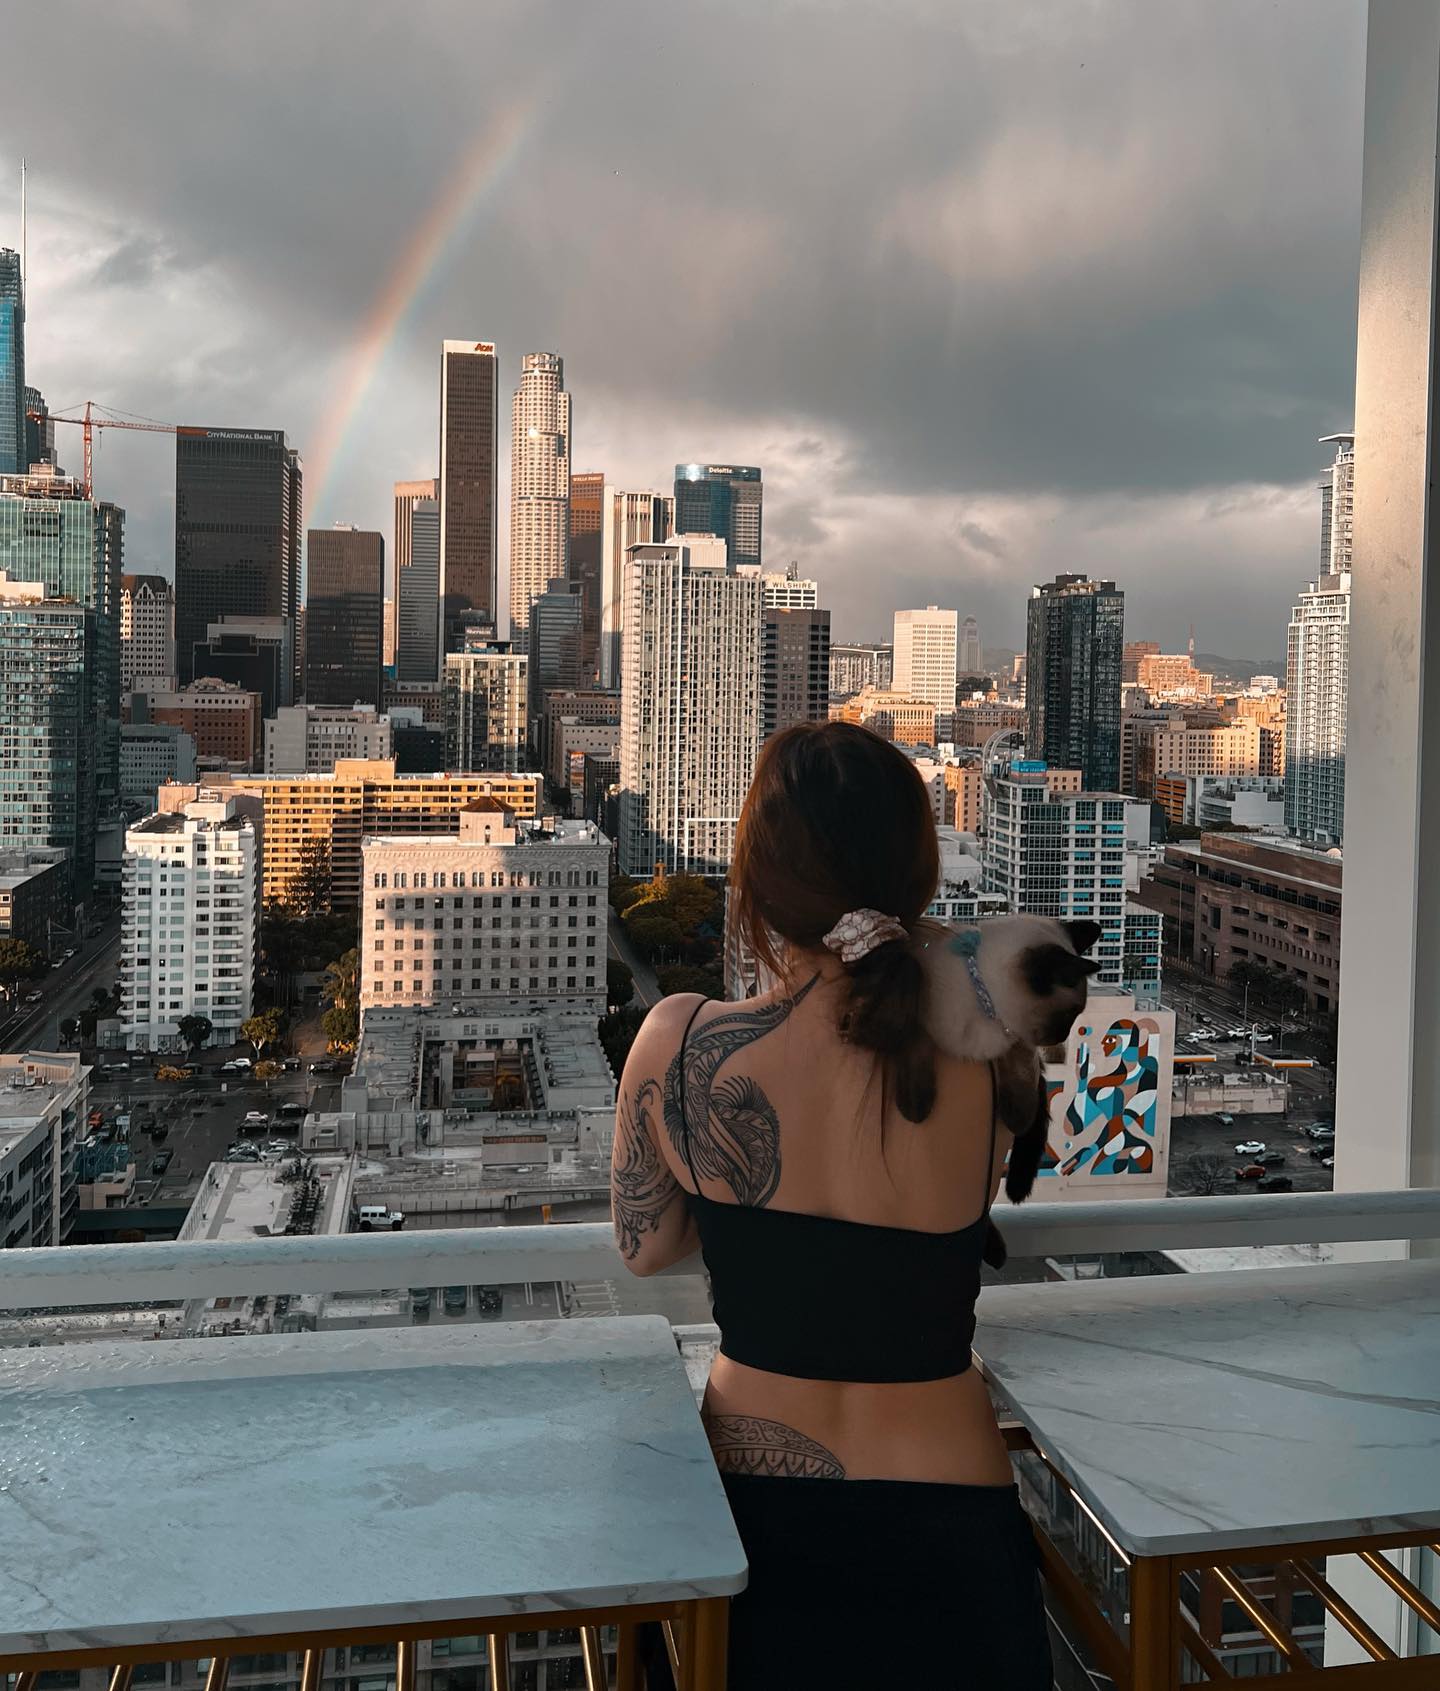 First time seeing this 🌈 over DTLA